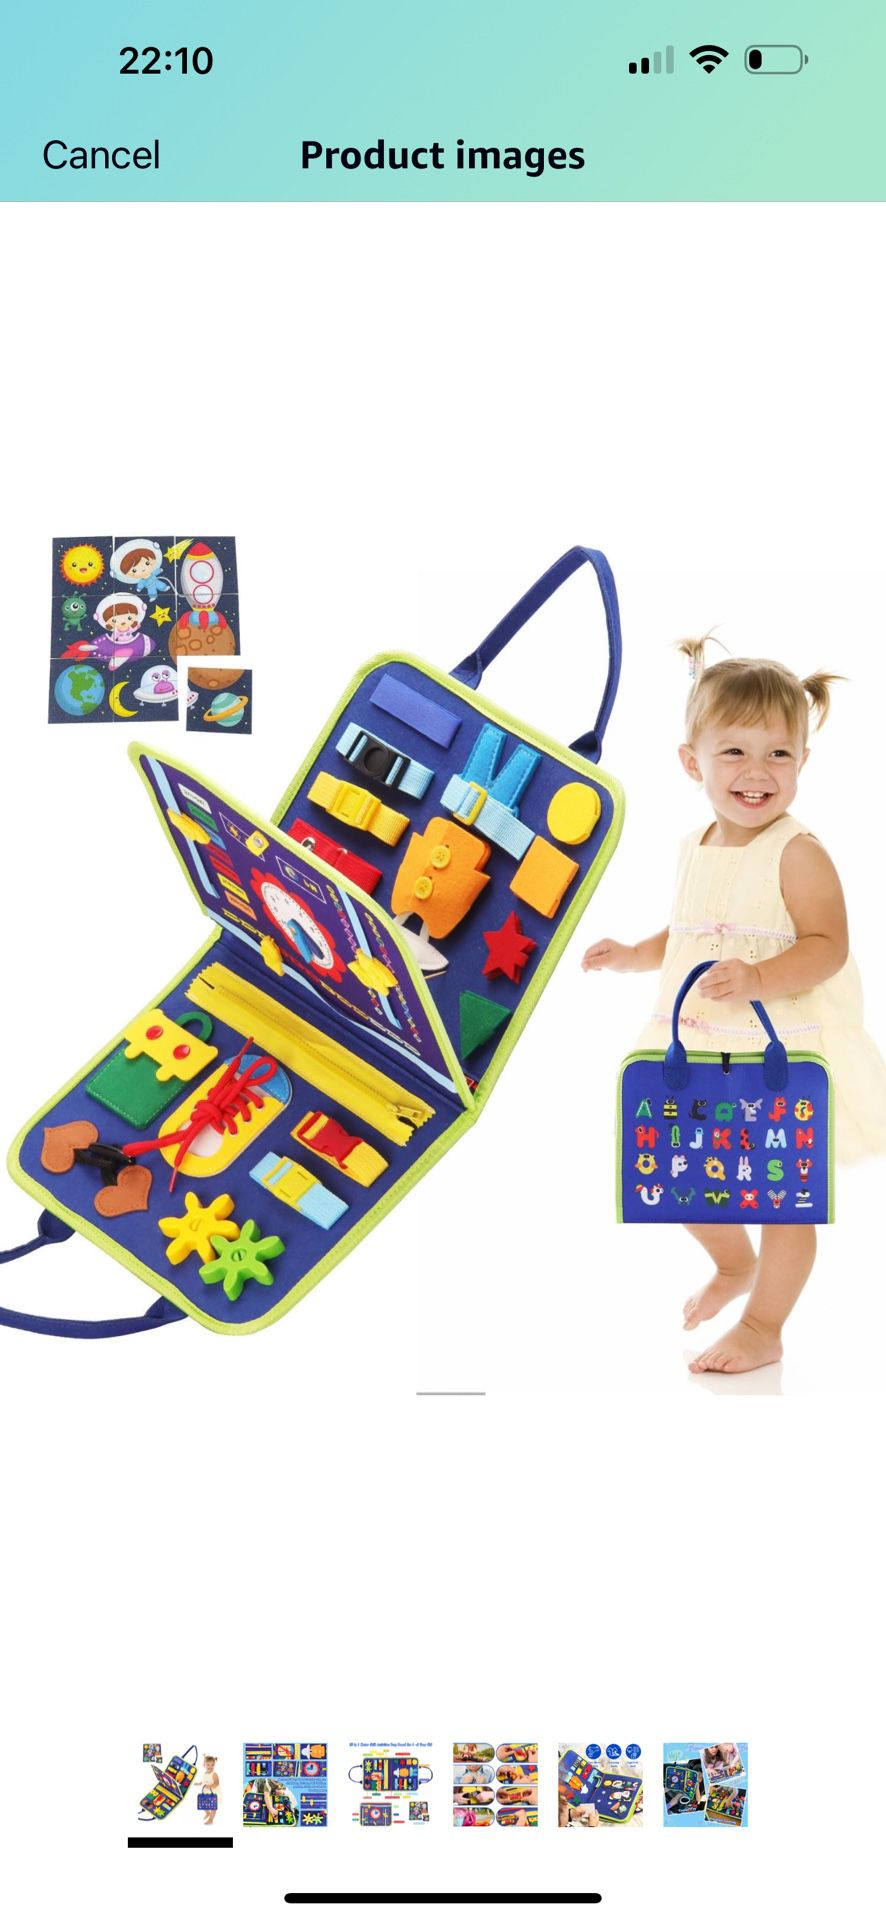 Brand New Busy Board Montessori Toy, Preschool Learning Activities for Learning Fine Motor Skills-Autism Toddler Travel Toy